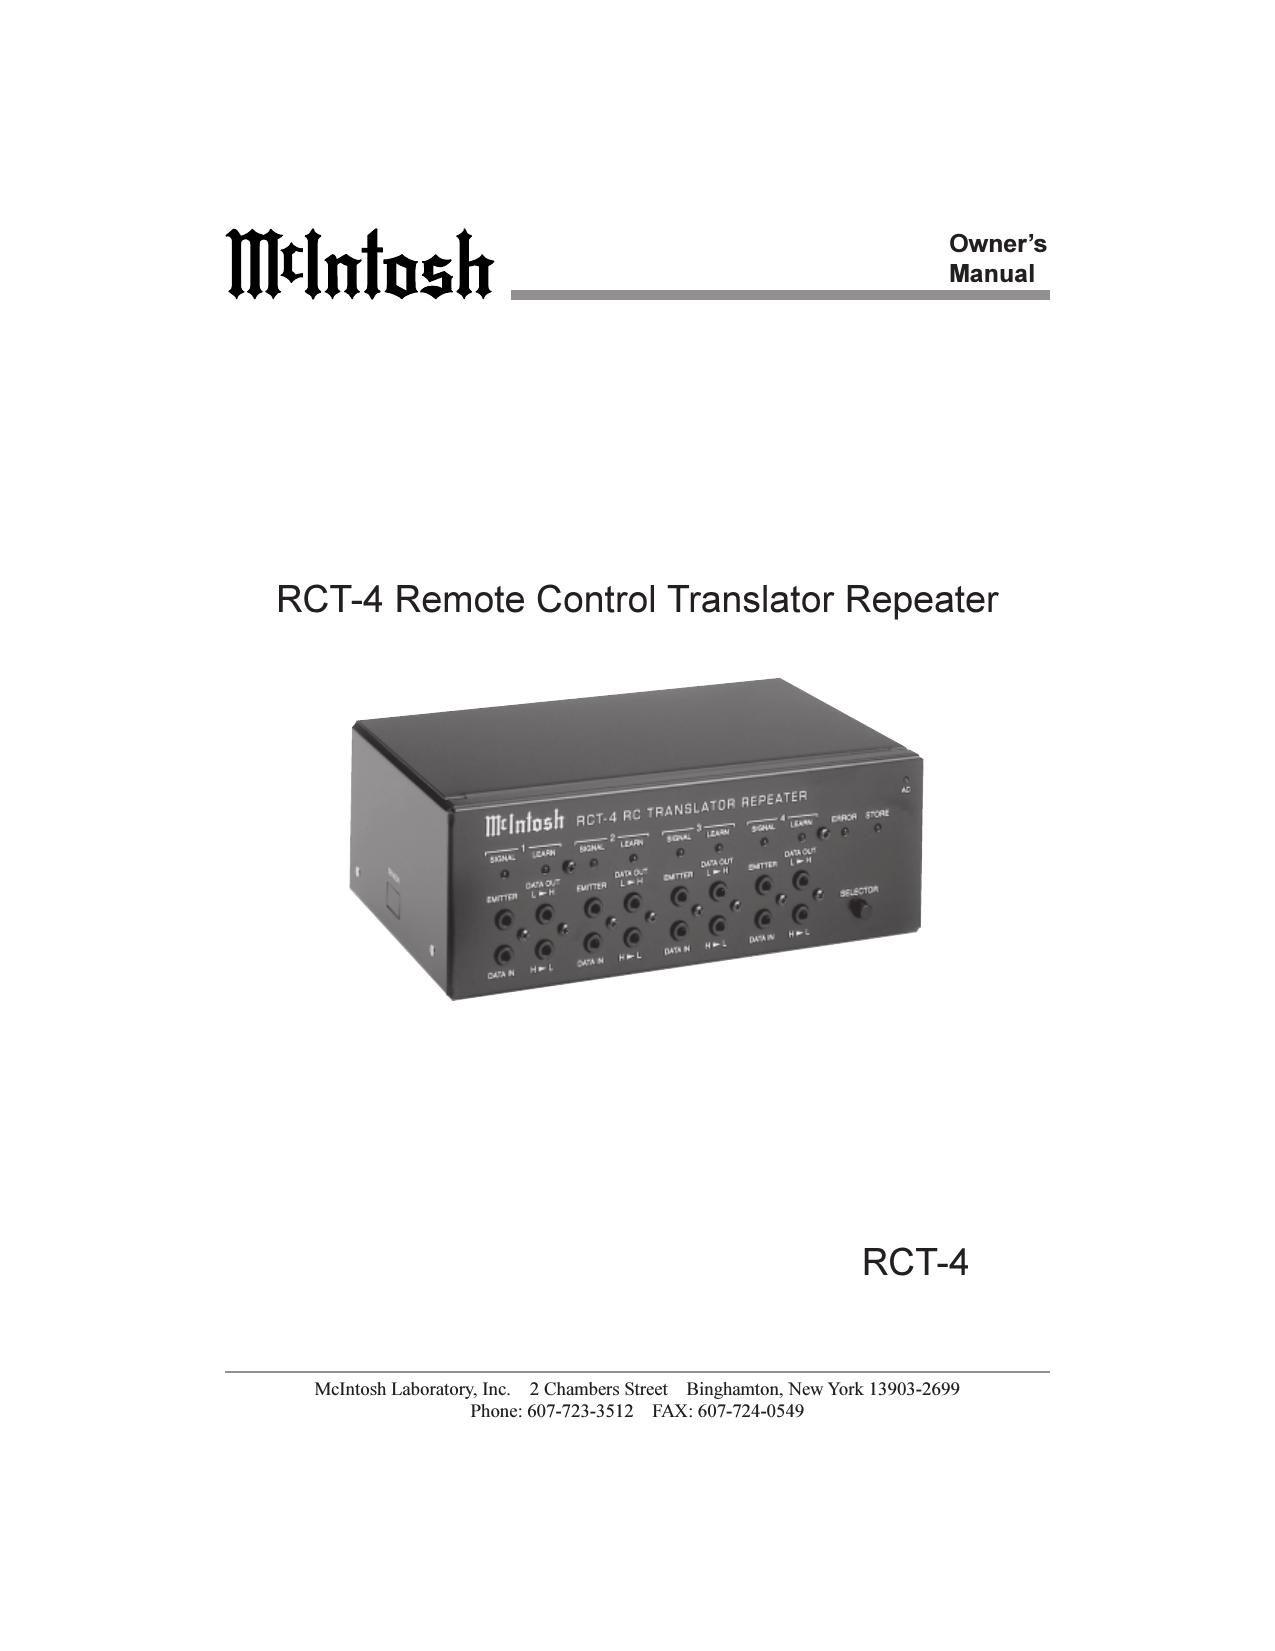 McIntosh RCT 4 Owners Manual